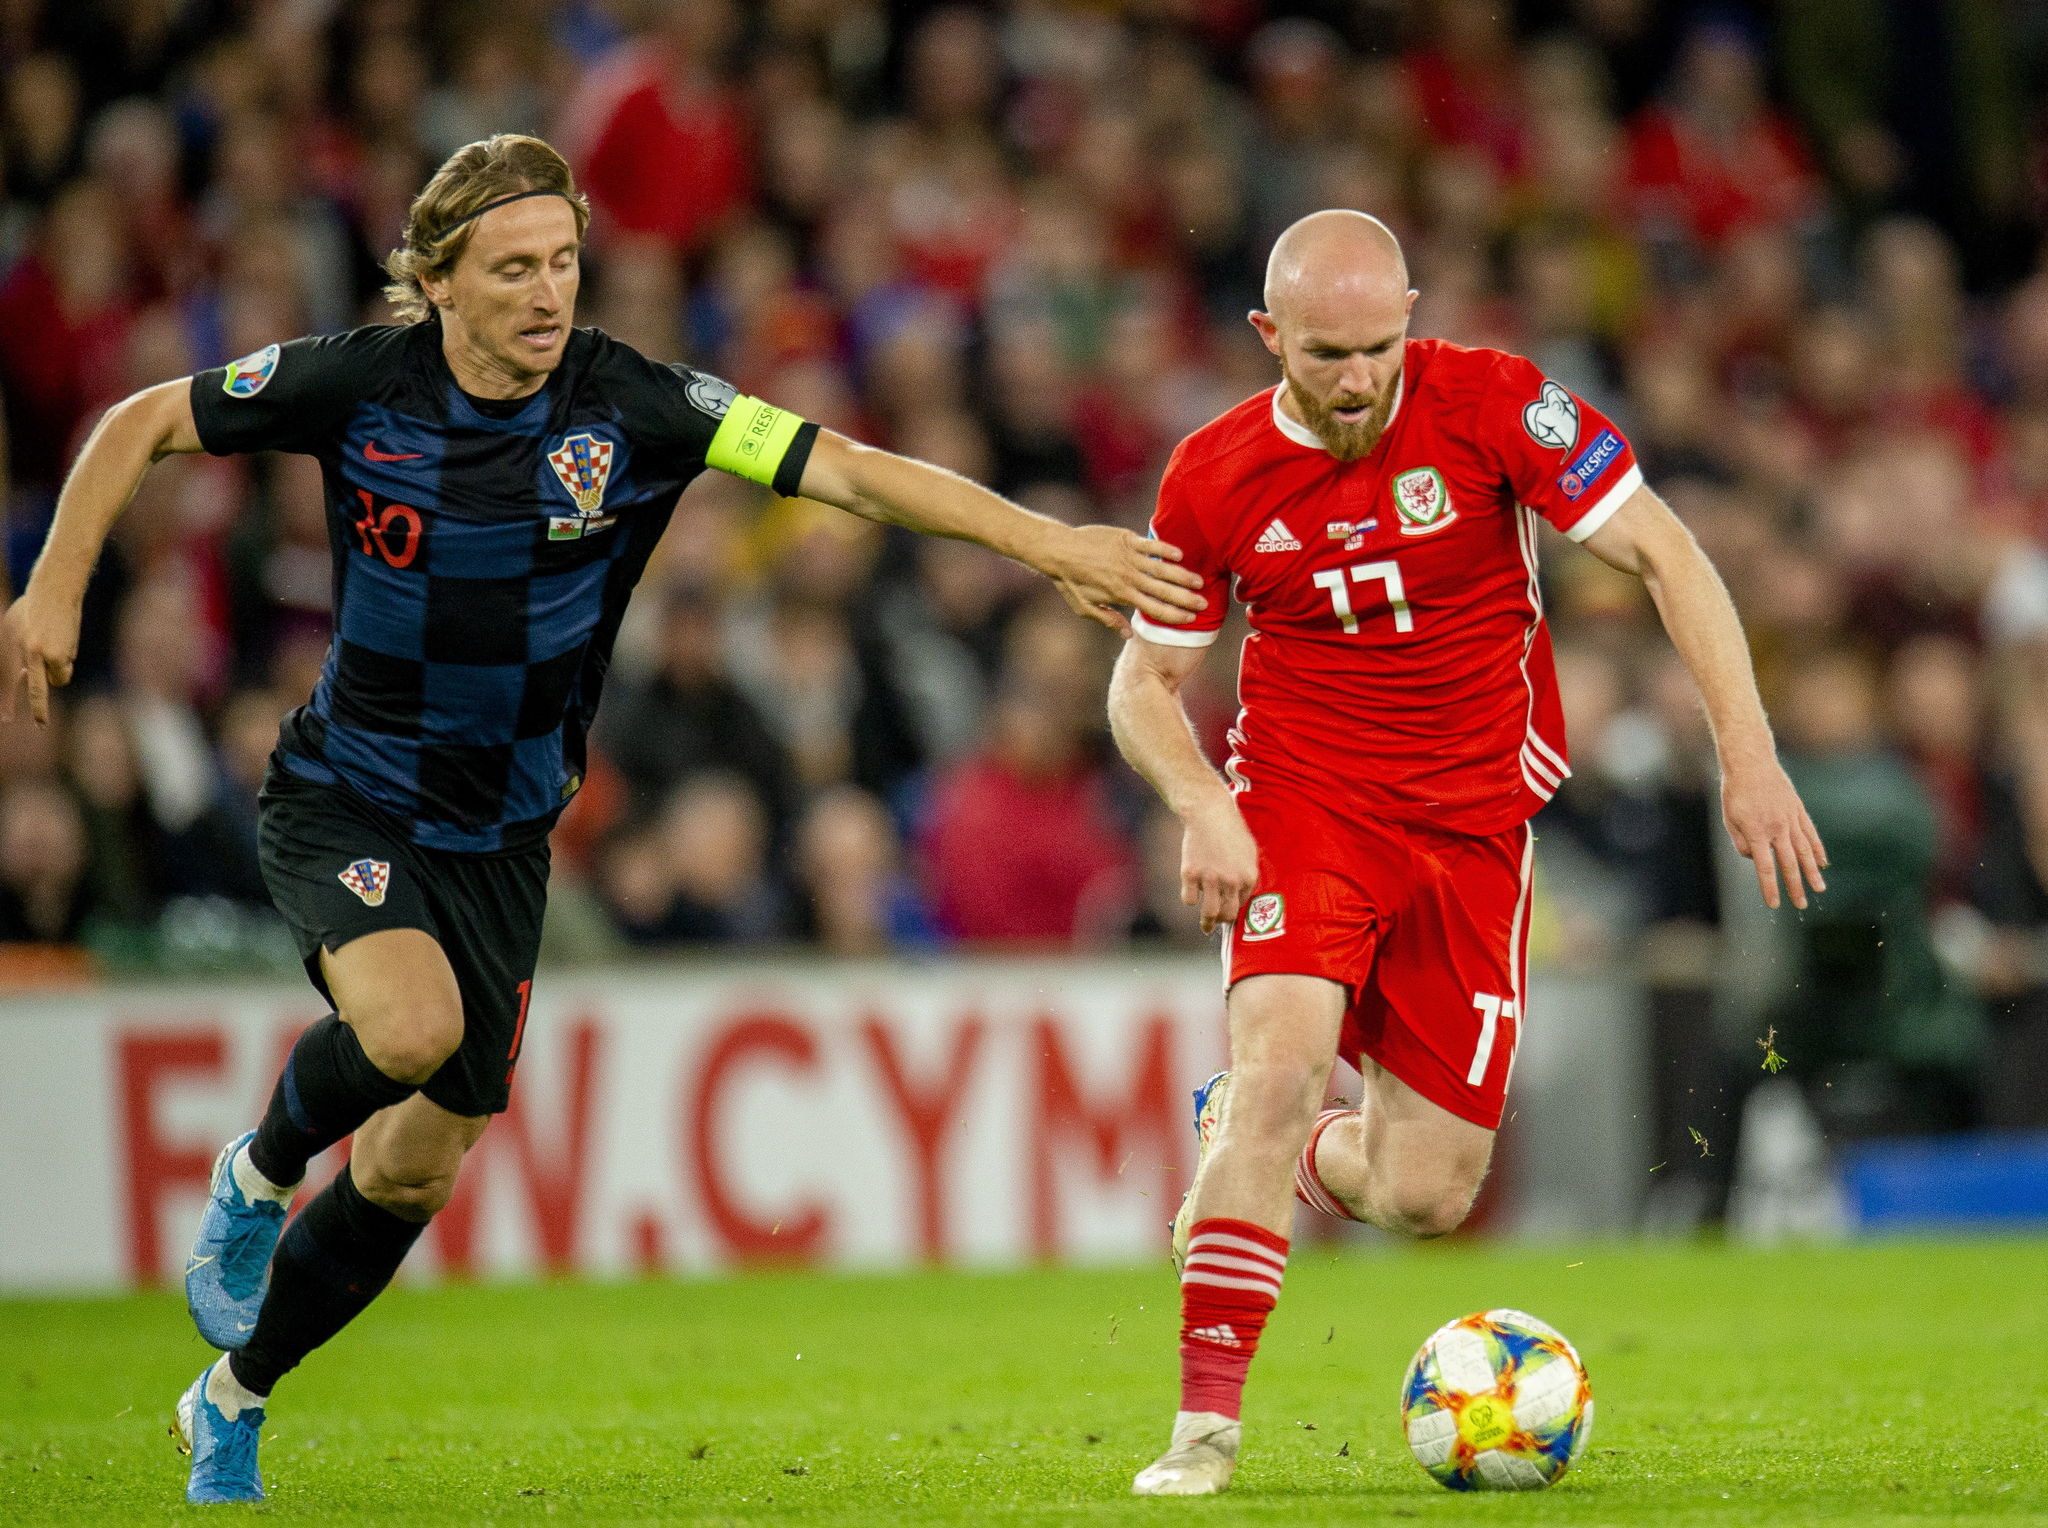 Cardiff (United Kingdom), 13/10/2019.- Croatias captain Luca <HIT>Modric</HIT> (L) in action with Wales Jonny Williams (R) during the UEFA EURO 2020 group E qualifier soccer match between Wales and Croatia held at Cardiff City Stadium in Wales, Britain, 13 October 2019. (<HIT>Croacia</HIT>, Reino Unido) EFE/EPA/PETER POWELL